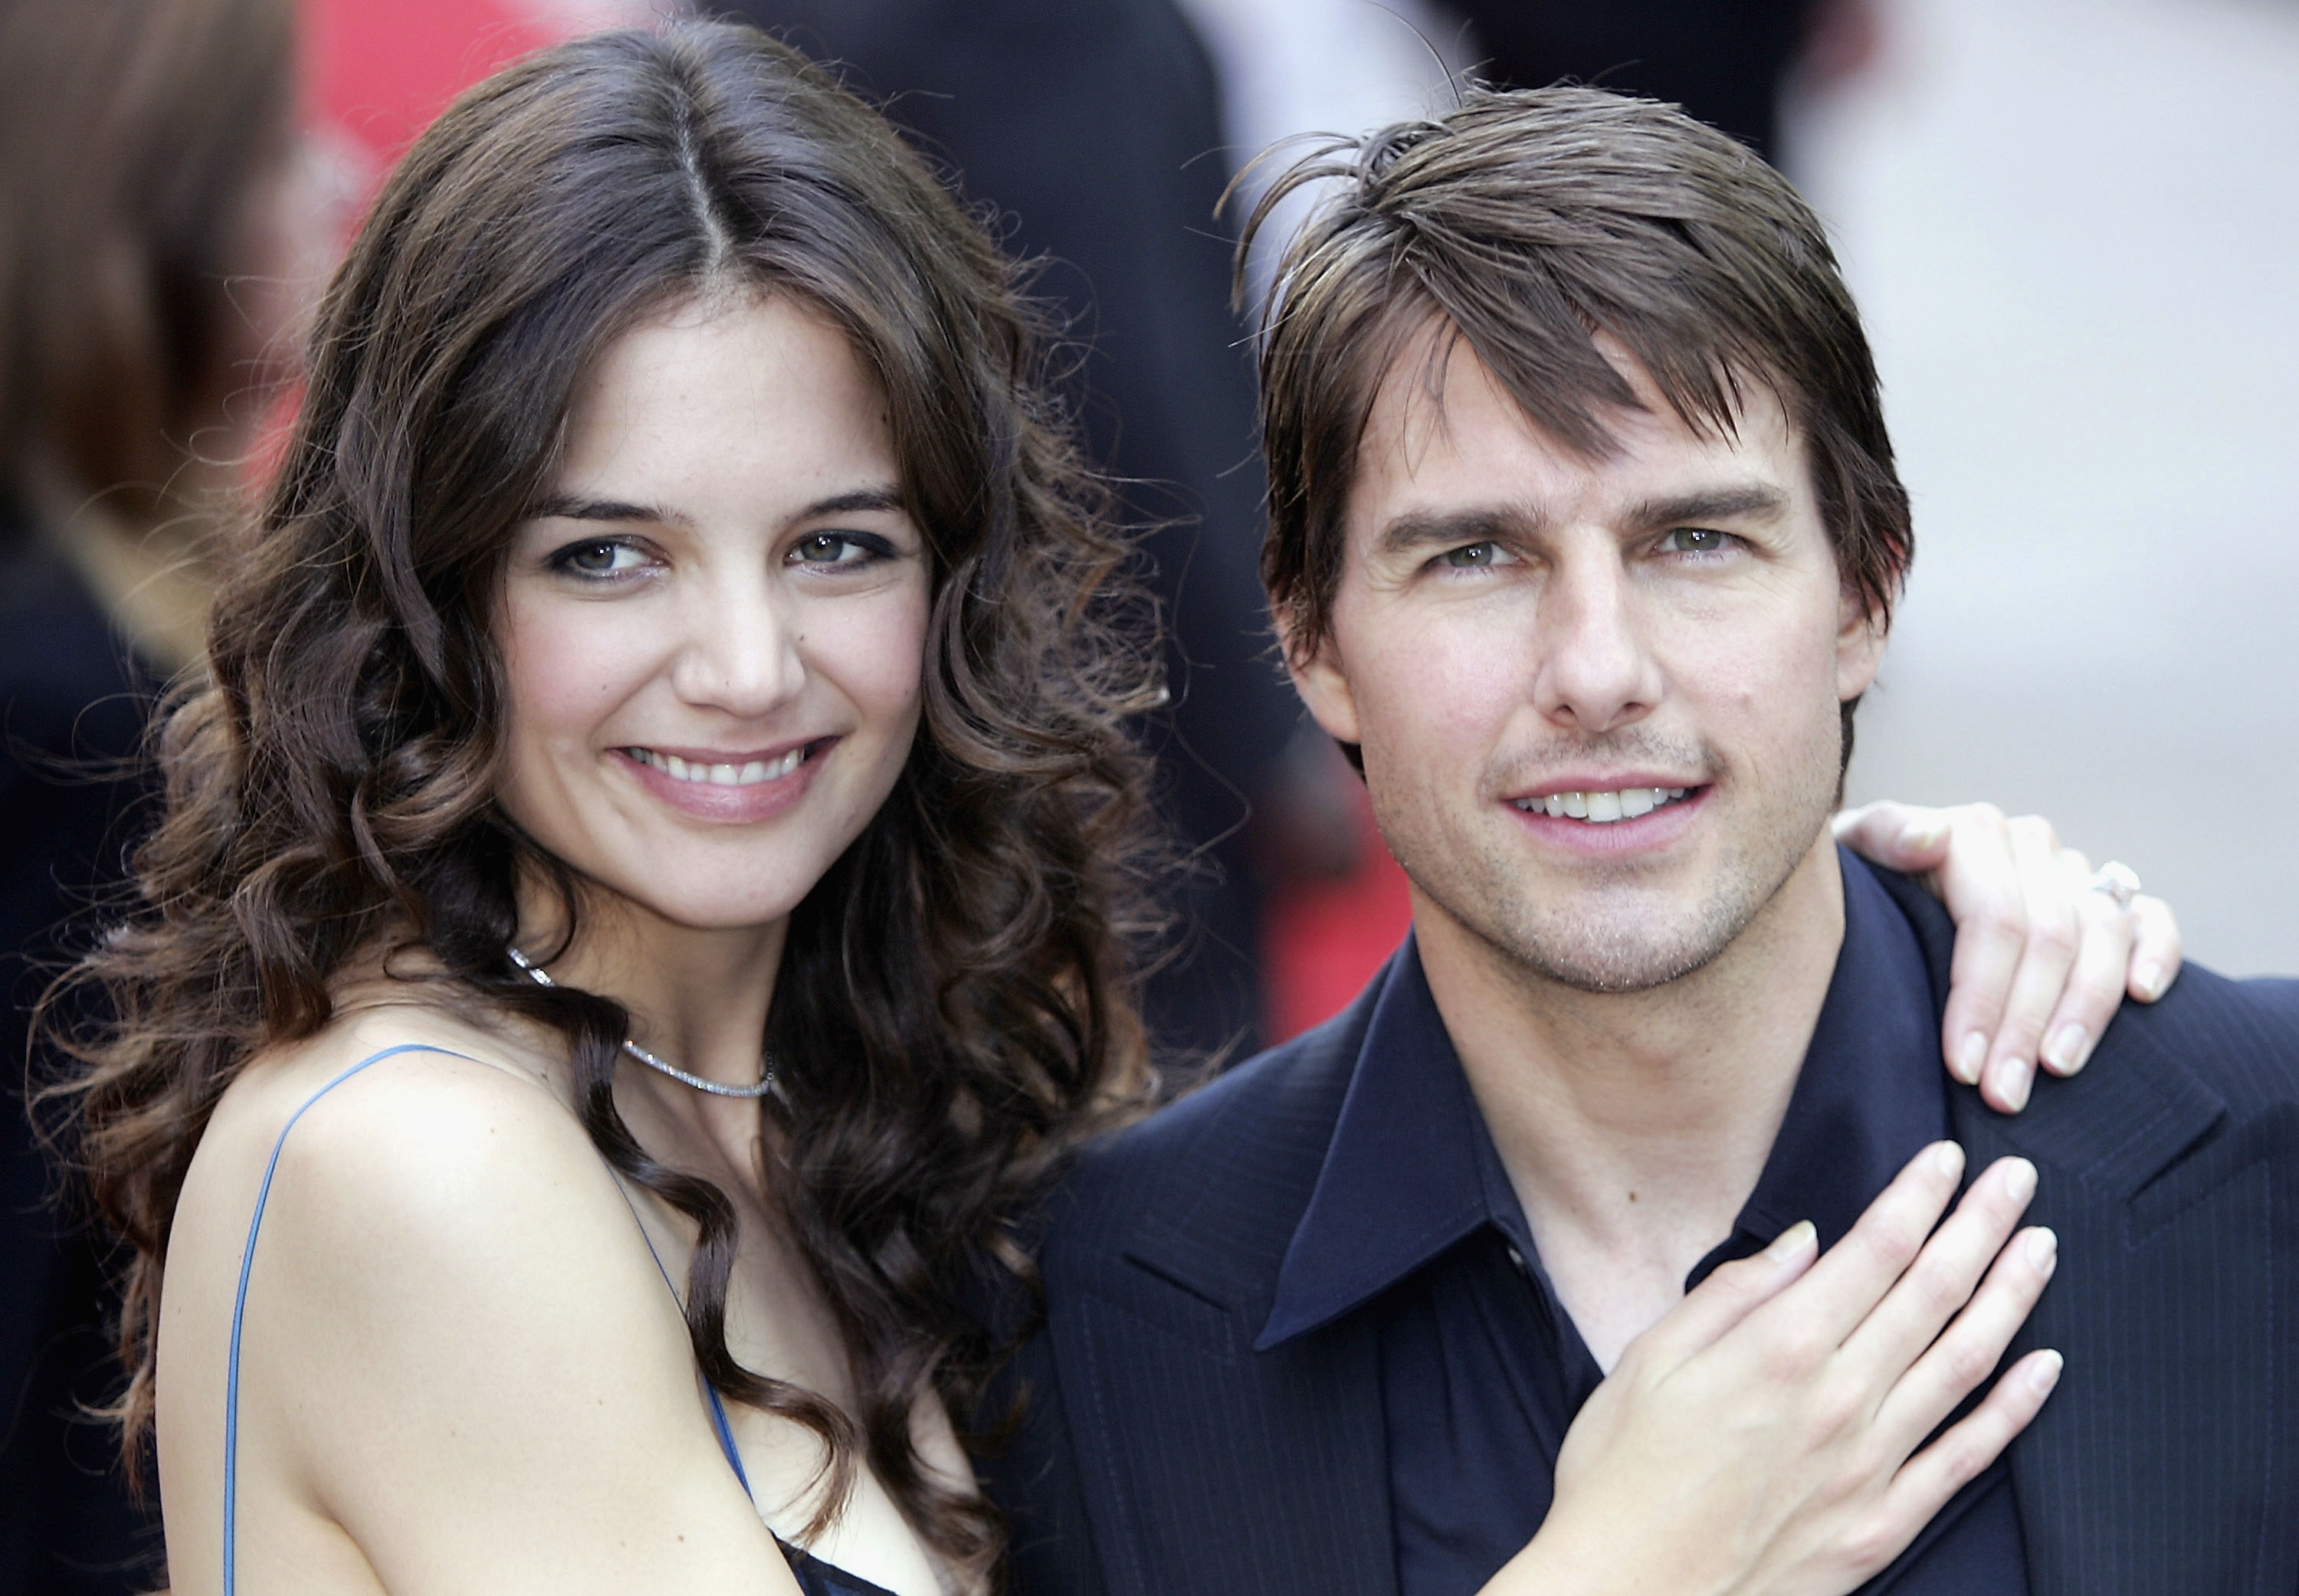 Tom Cruise and his fiancée Katie Holmes at the UK premiere of "War Of The Worlds" on June 19, 2005, in London, England | Source: Getty Images